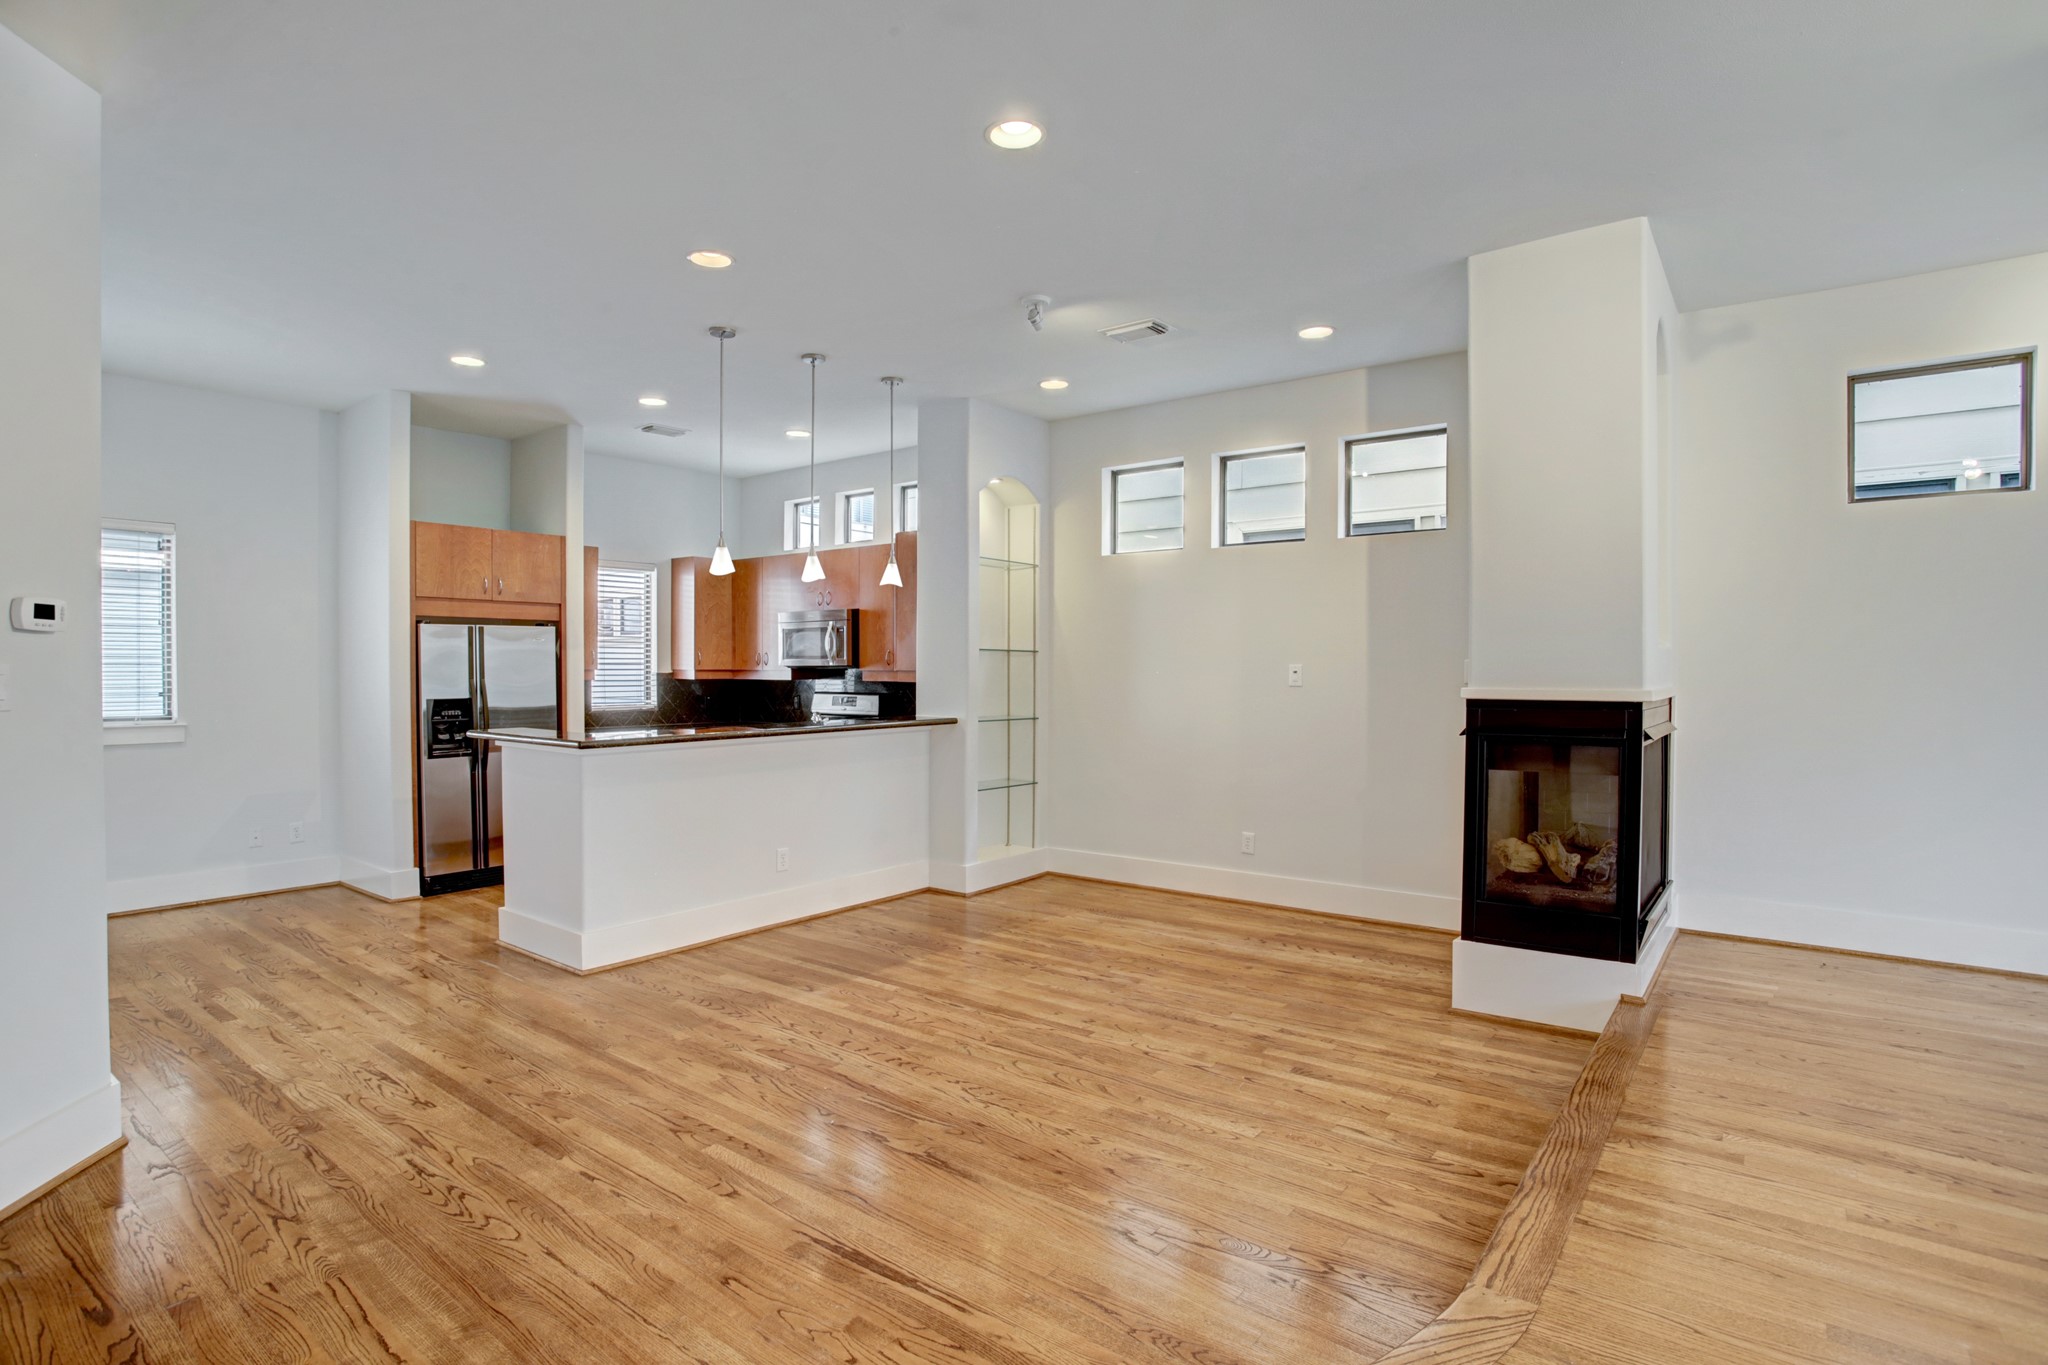 A great view of the kitchen and dining room from the living area. The floors just sparkle with all the natural light.